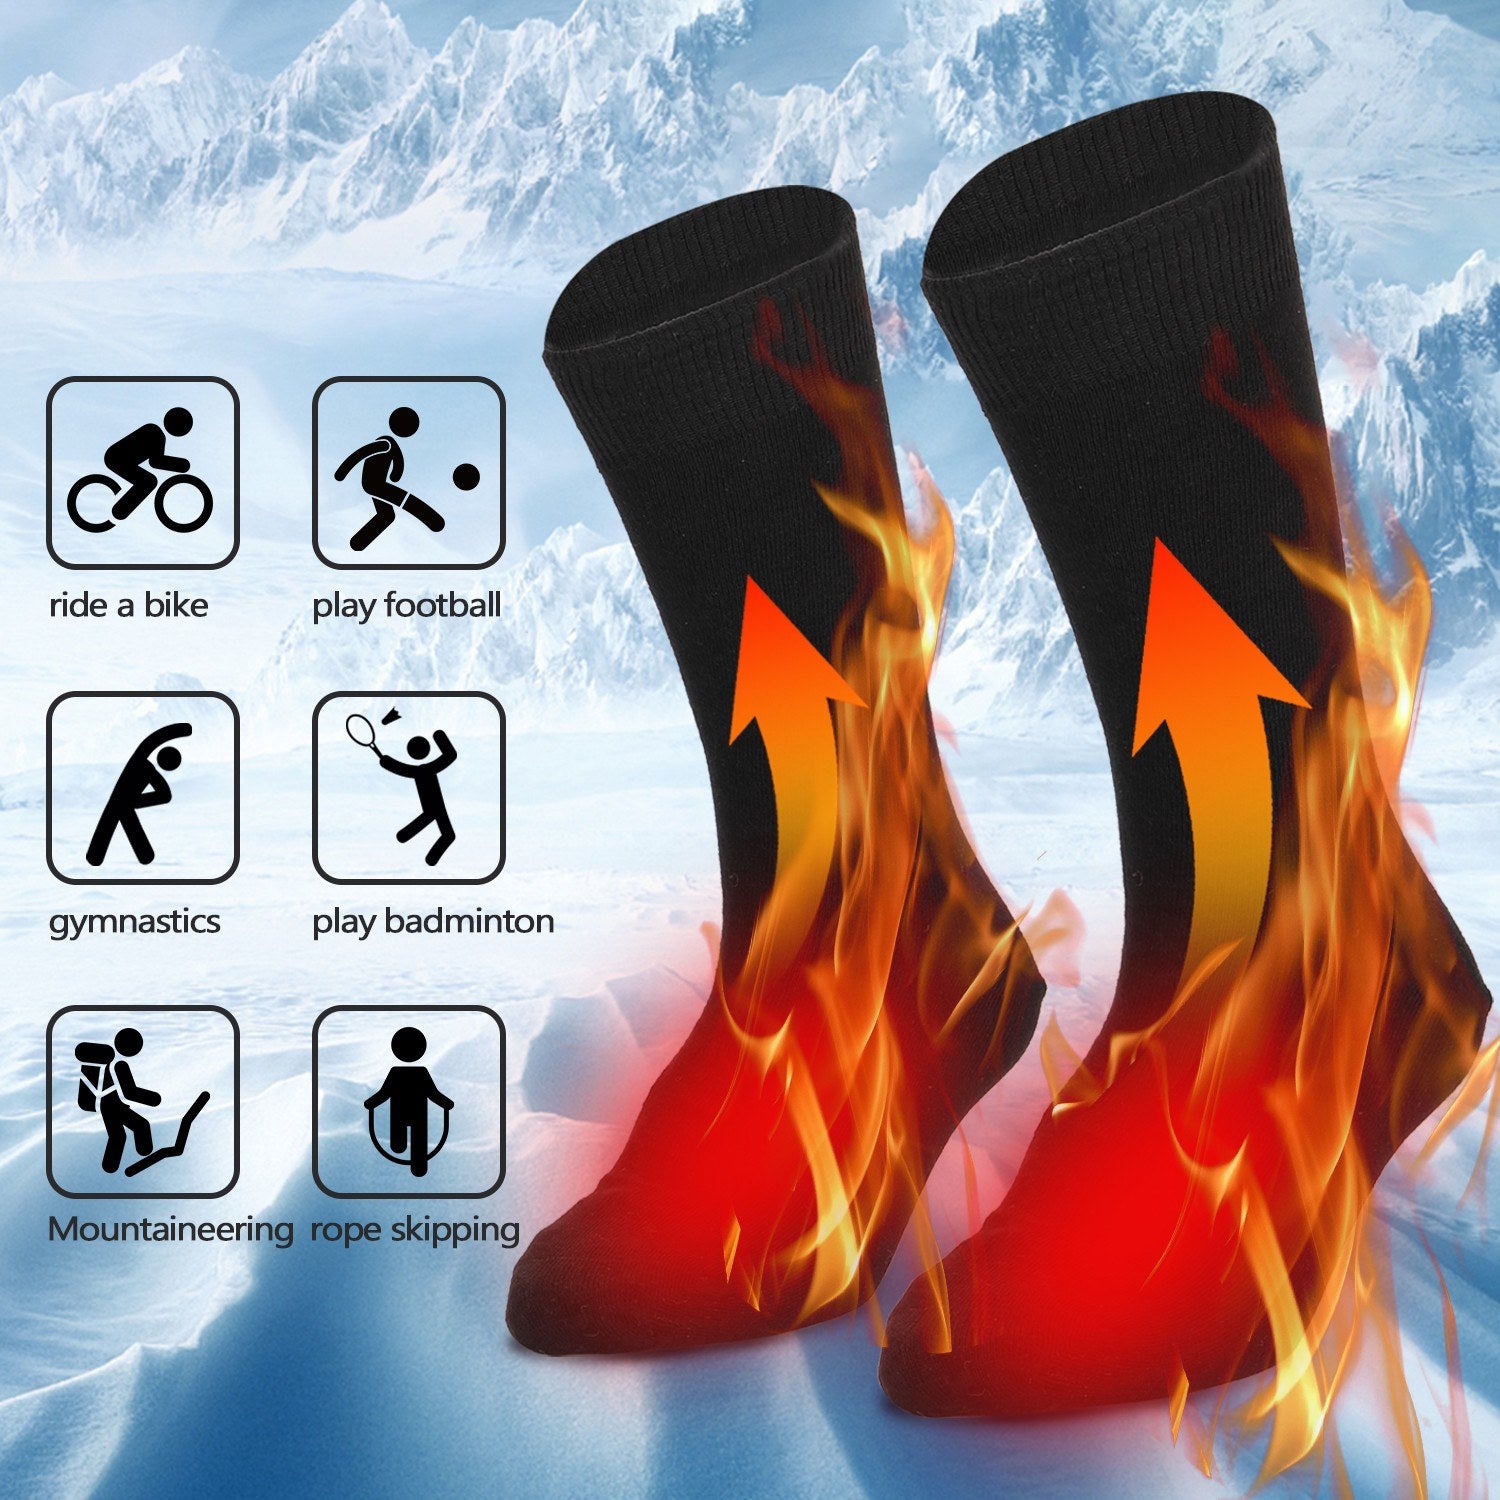 1Pair Heated Socks Battery Powered Cold Weather Thermal Heating Socks Electric Heated Foot Warmer for Hunting Skiing Campin - 3Pcs Batteries Required